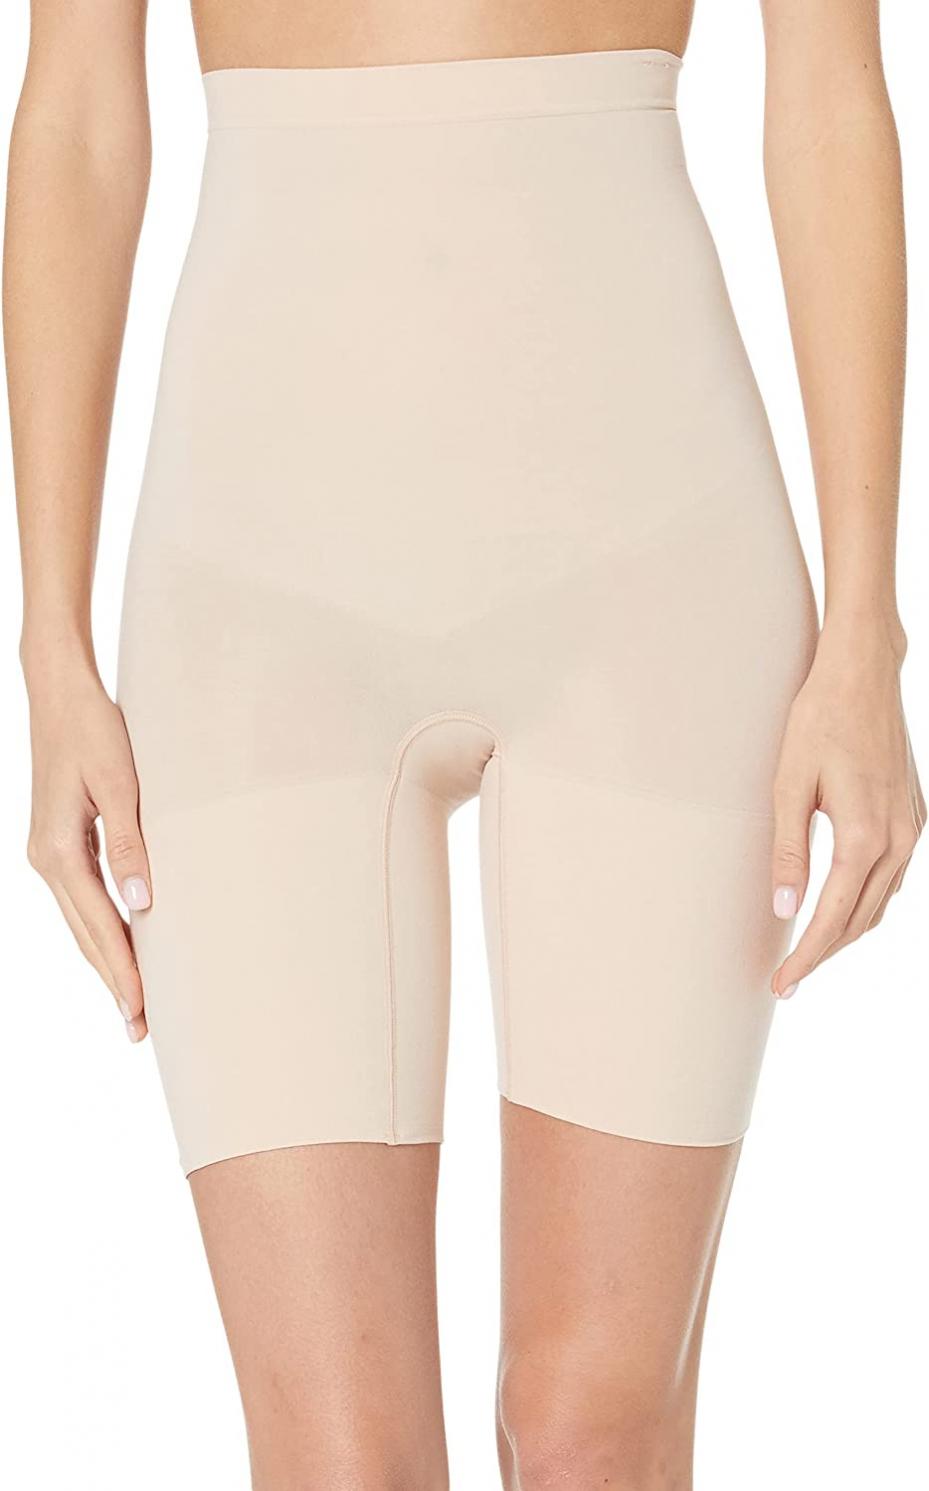 SPANX Higher Power Shorts - High-Rise Waist with Double Gusset Design Functional Shapewear for Women Soft Nude SM One Size